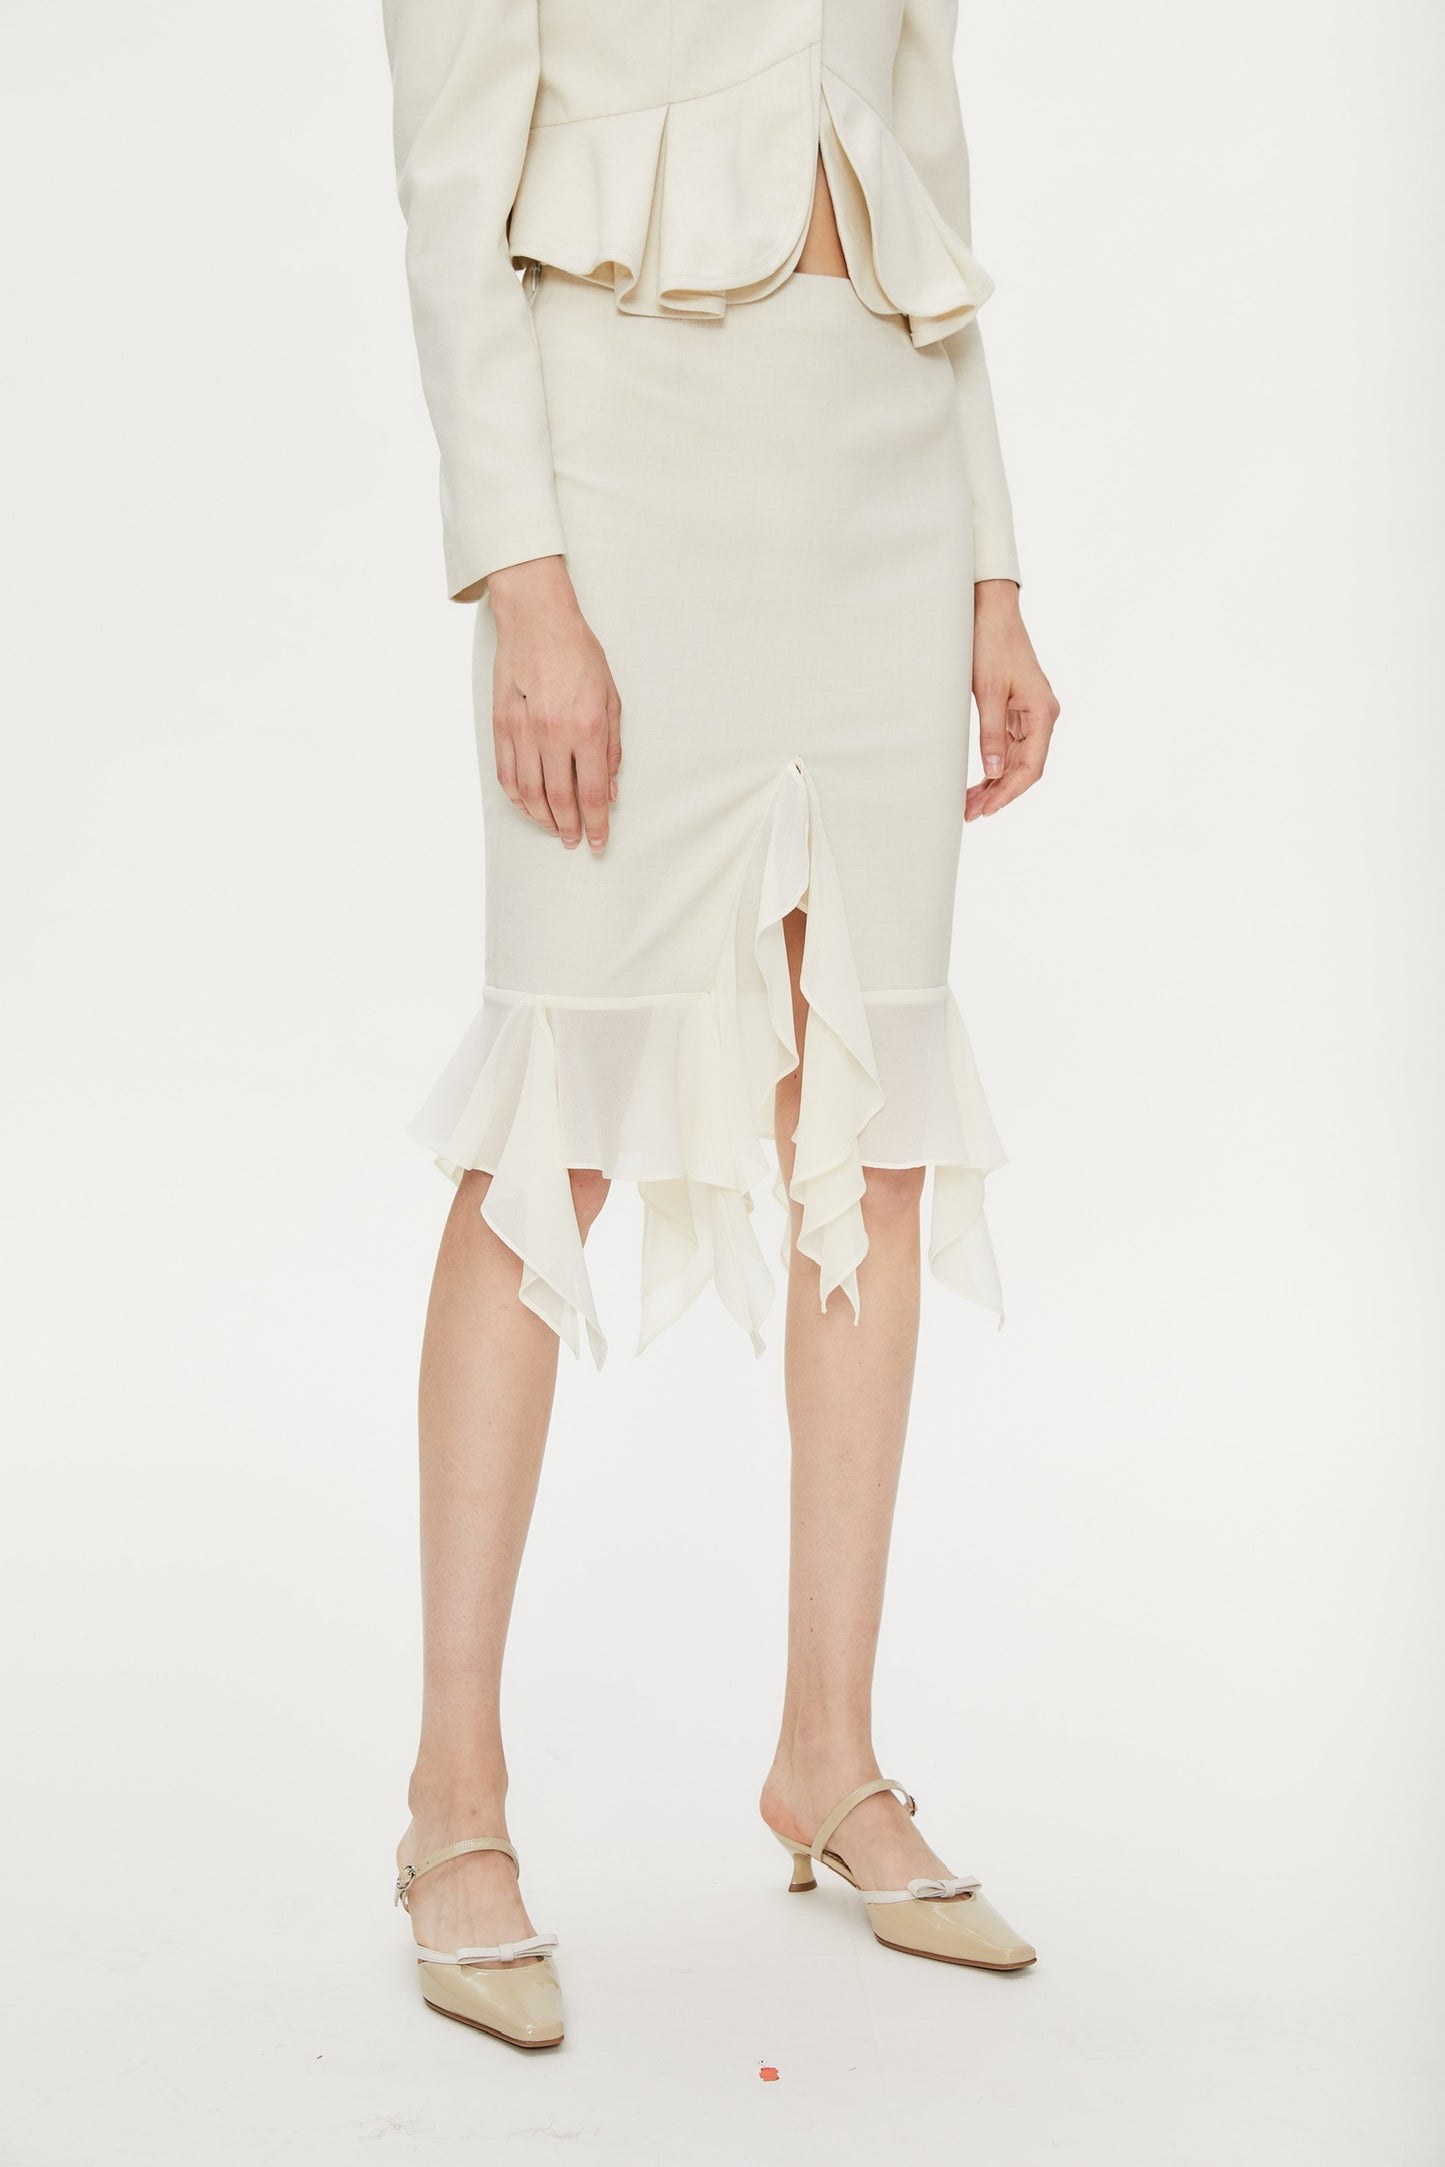 Mag Lace Splicing Fishtail Skirt in Beige